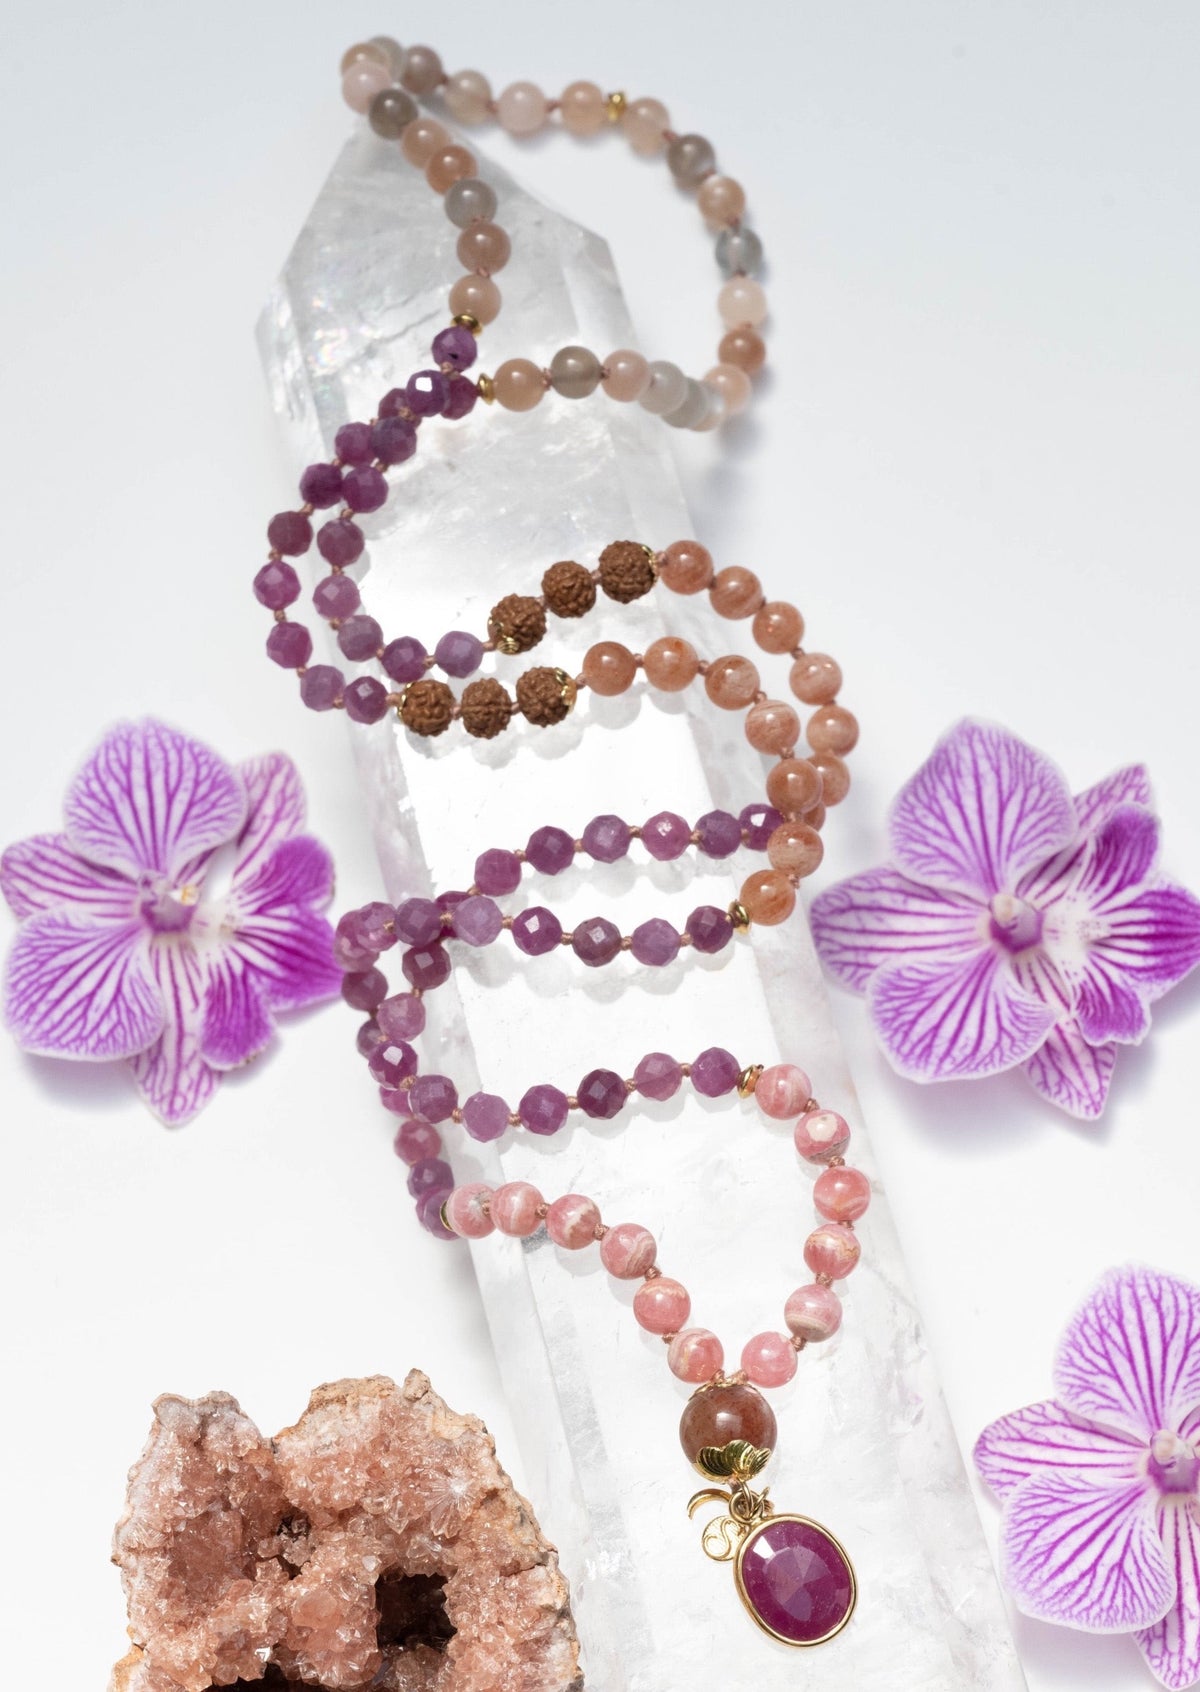 AMMA Woman of Light Ruby Mala with Rose Gold, Sunstone and Rhodochrosite.